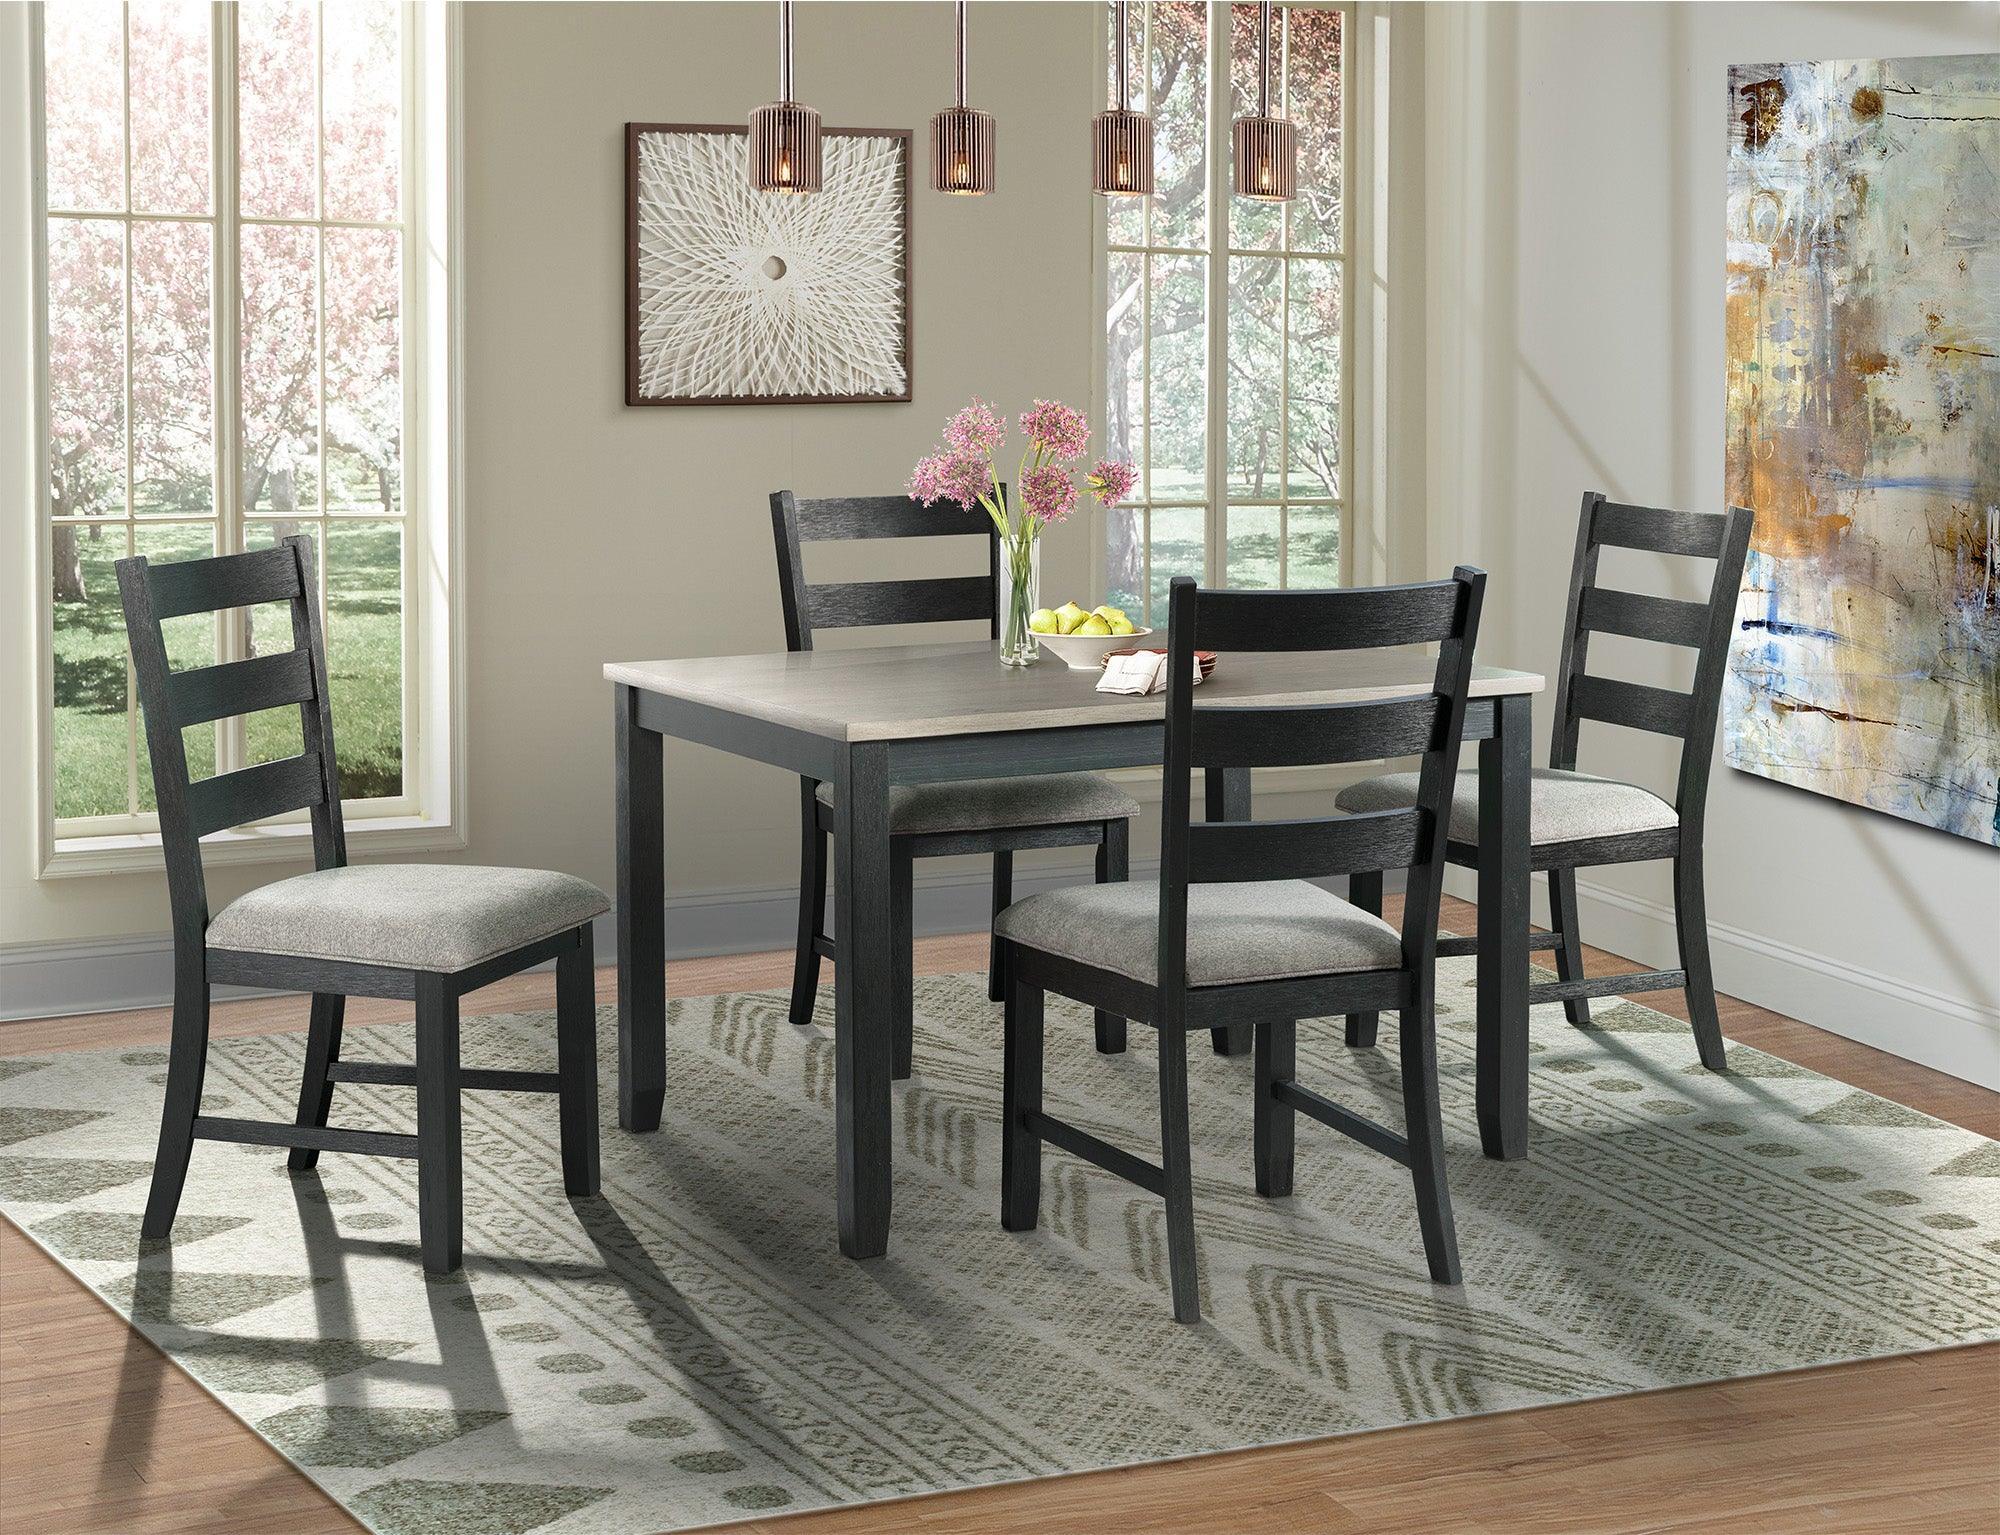 Elements Dining Chairs - Kona Standard Height Side Chair Set in Black